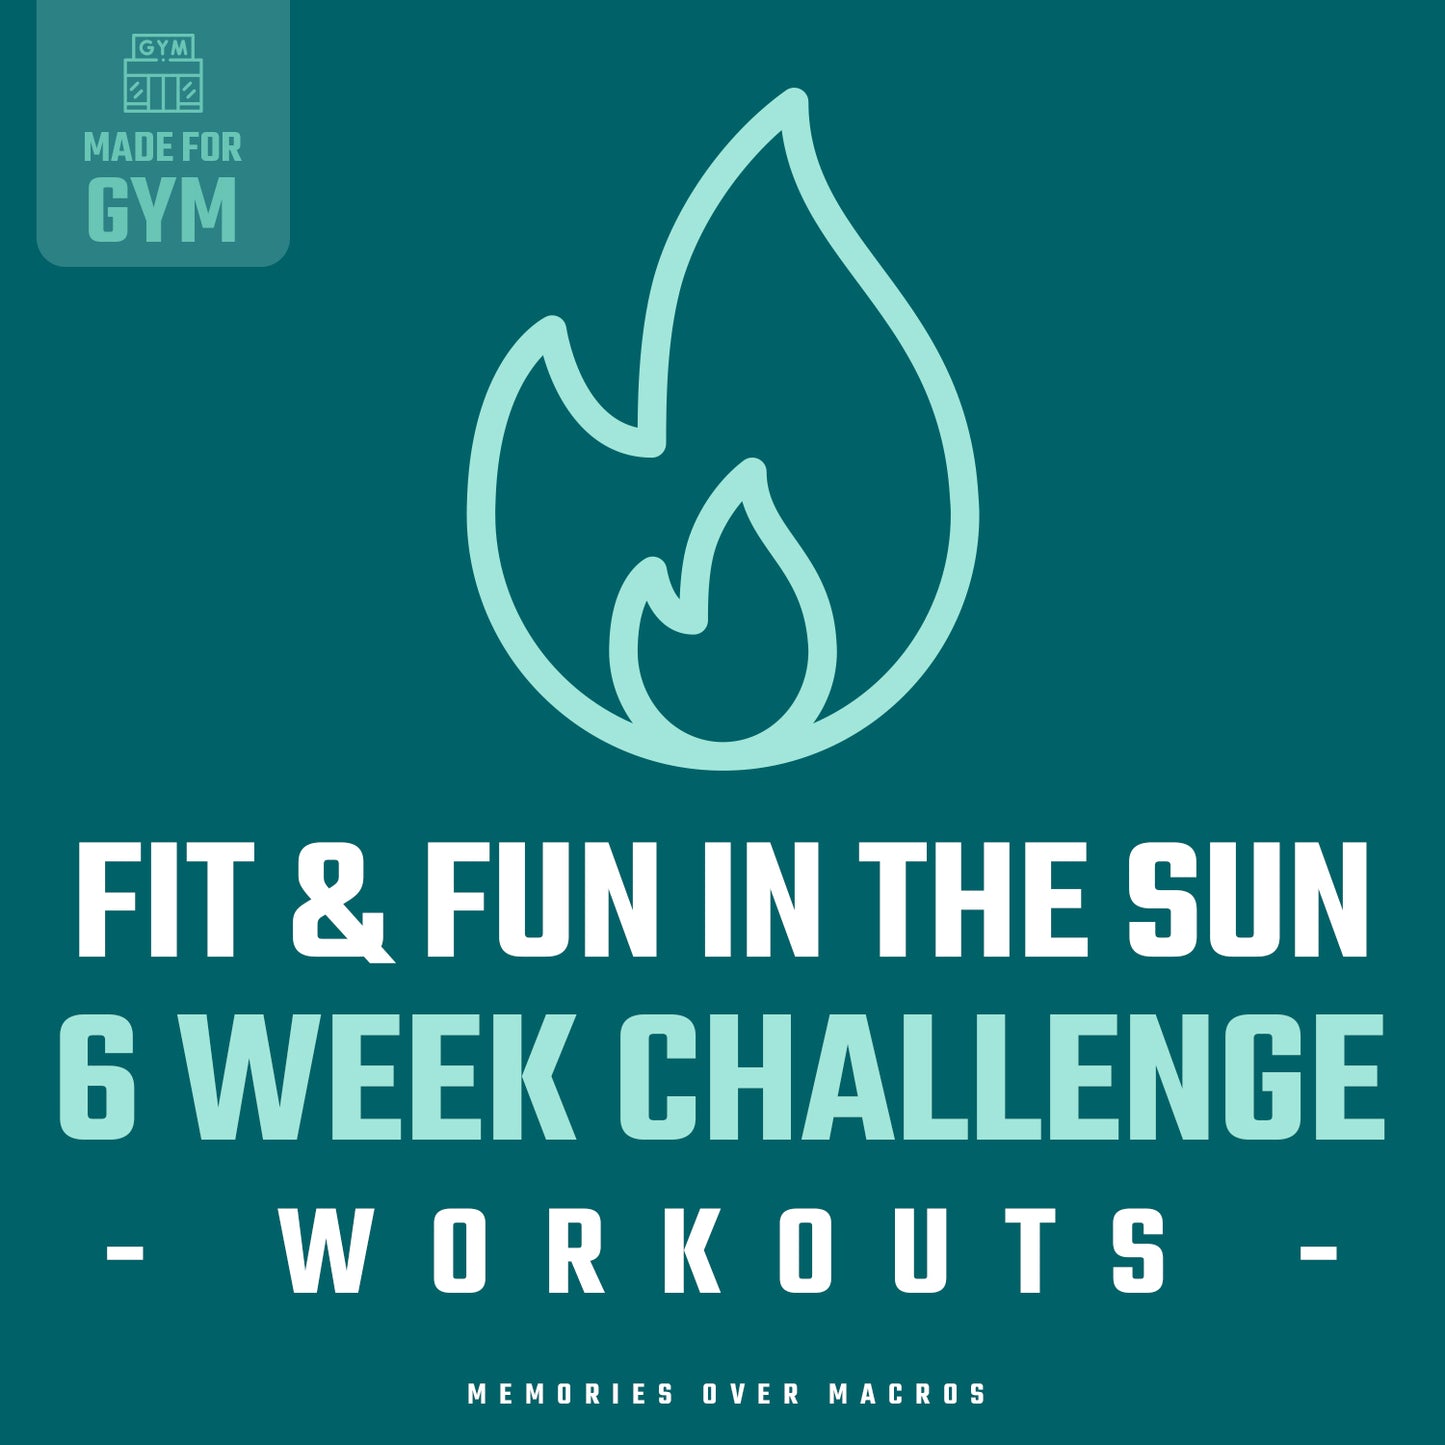 Fit & Fun in the Sun - 6 Week Challenge Workouts